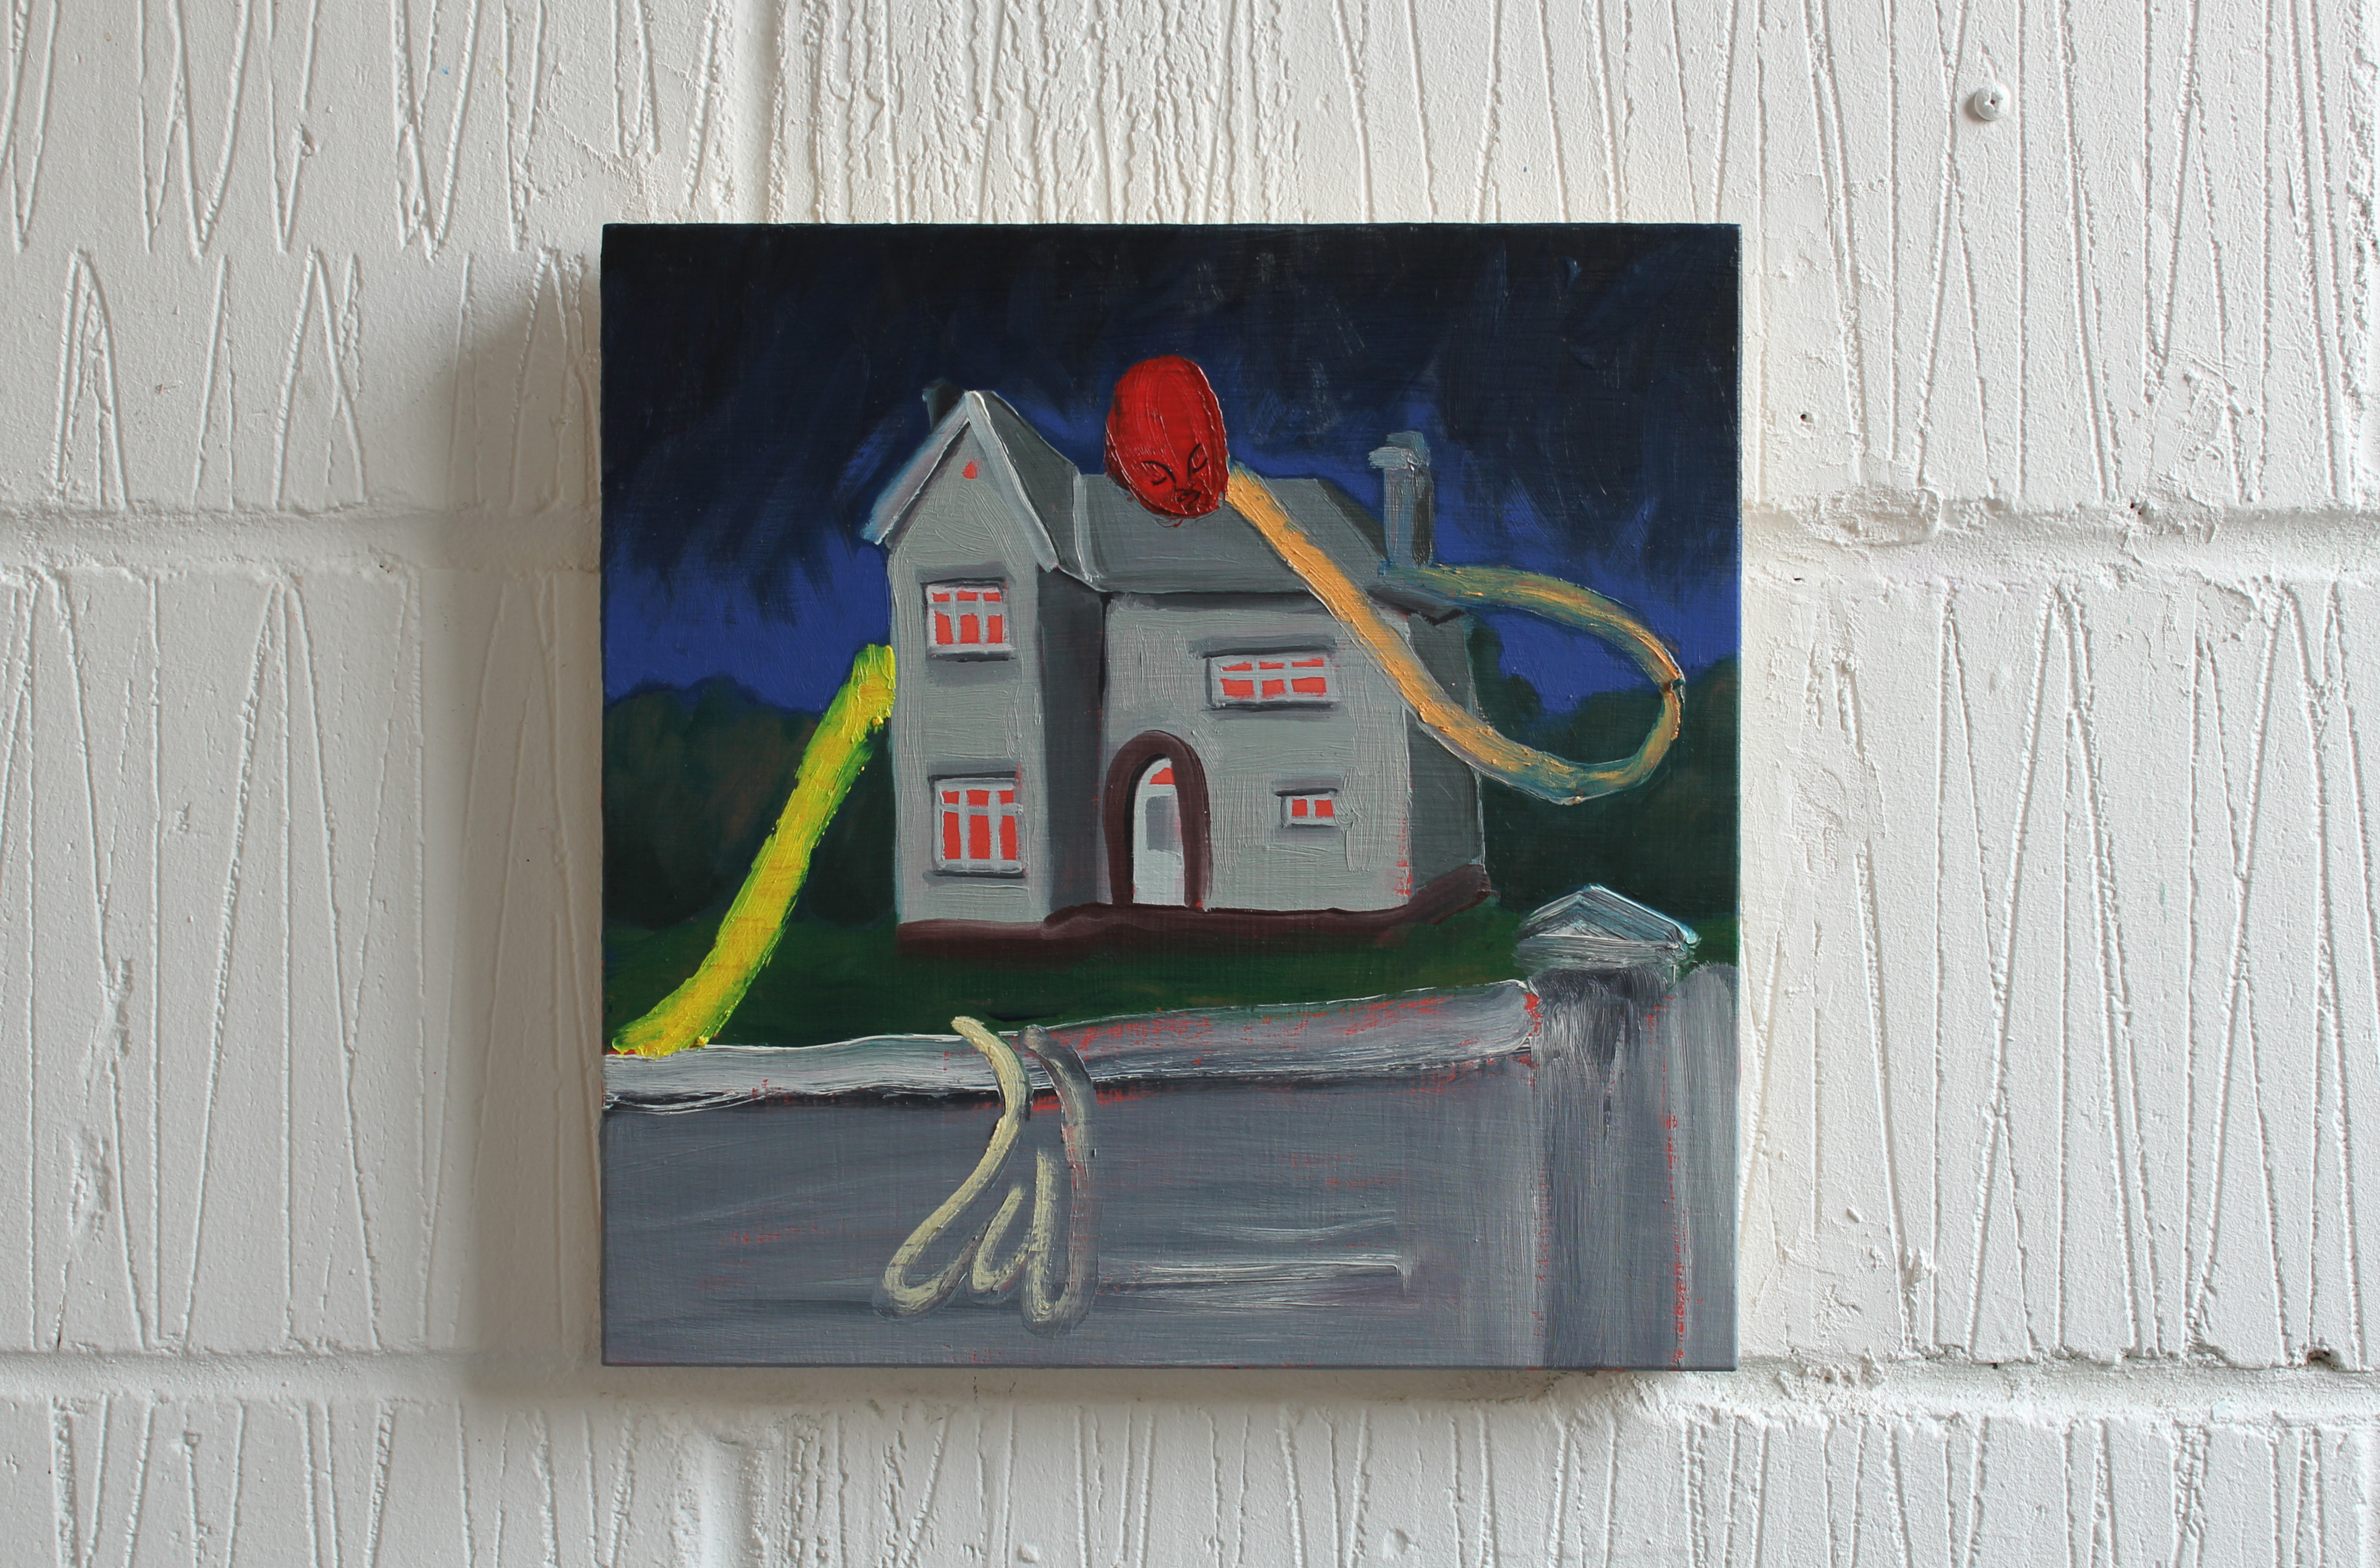 'Cottage 7' on the wall